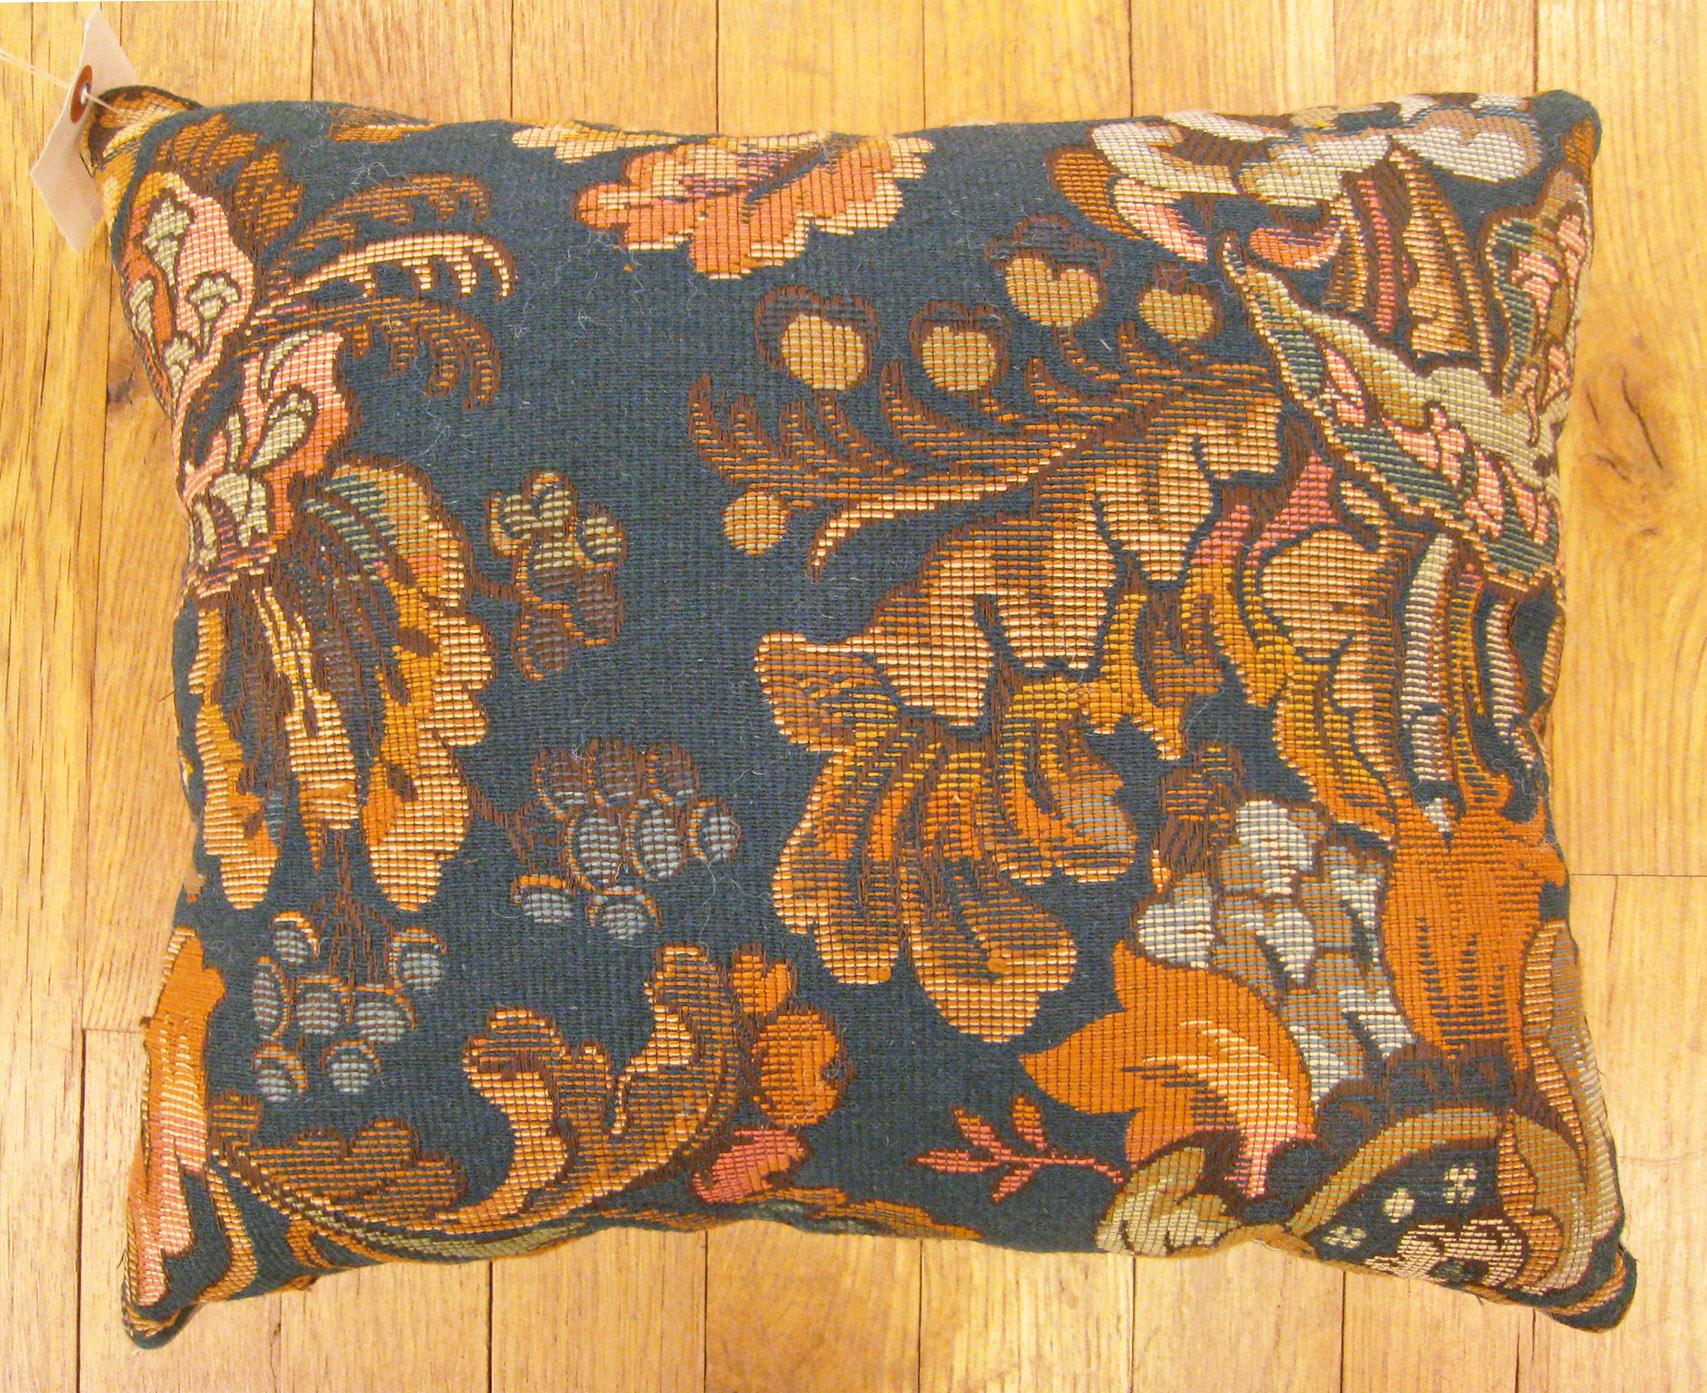 Antique Jacquard Tapestry Pillow; size 1'1” x 1'3”. 

An antique decorative pillow with floral elements allover an overdye blue central field, size 1'1